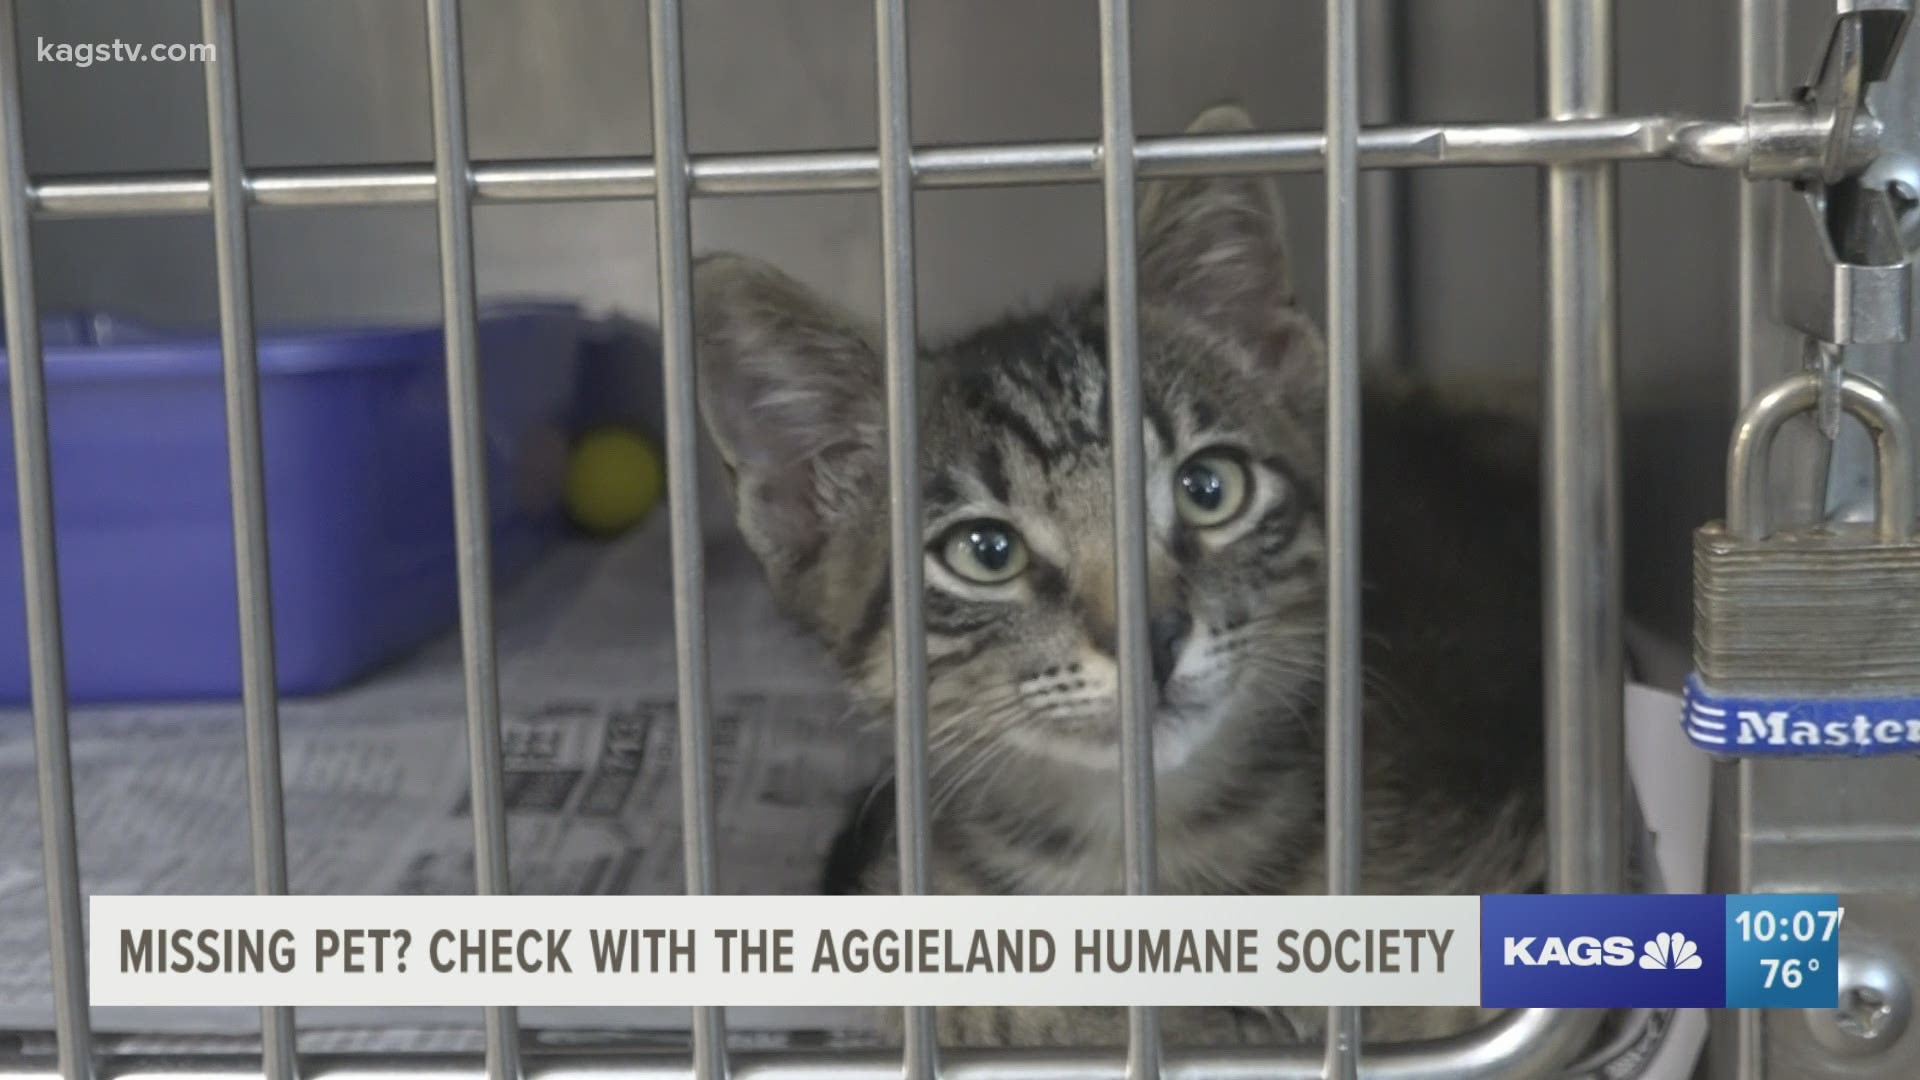 The Aggieland Humane Society has taken in more than 100 stray pets within the past week